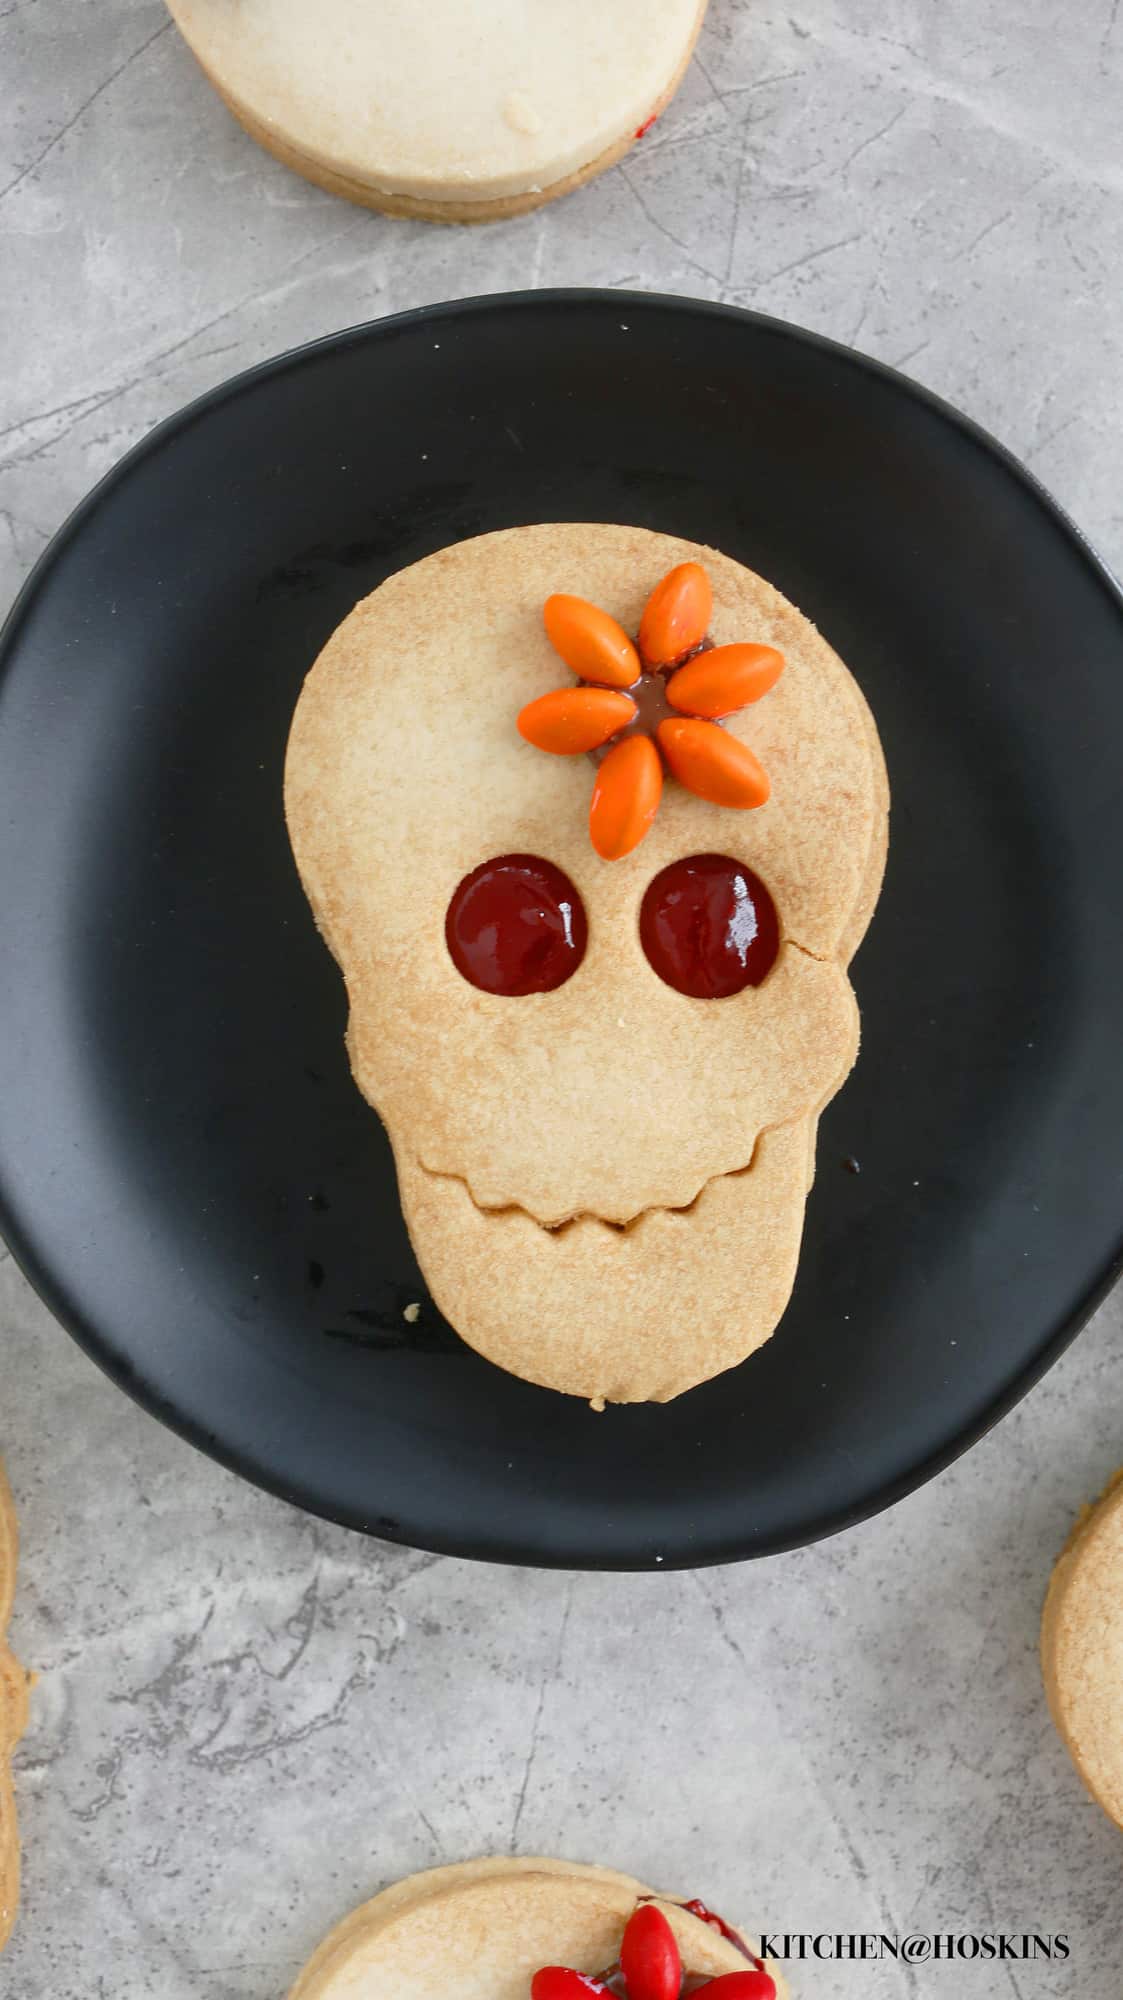 A homemade halloween cookie in the shape of a skull on a black plate